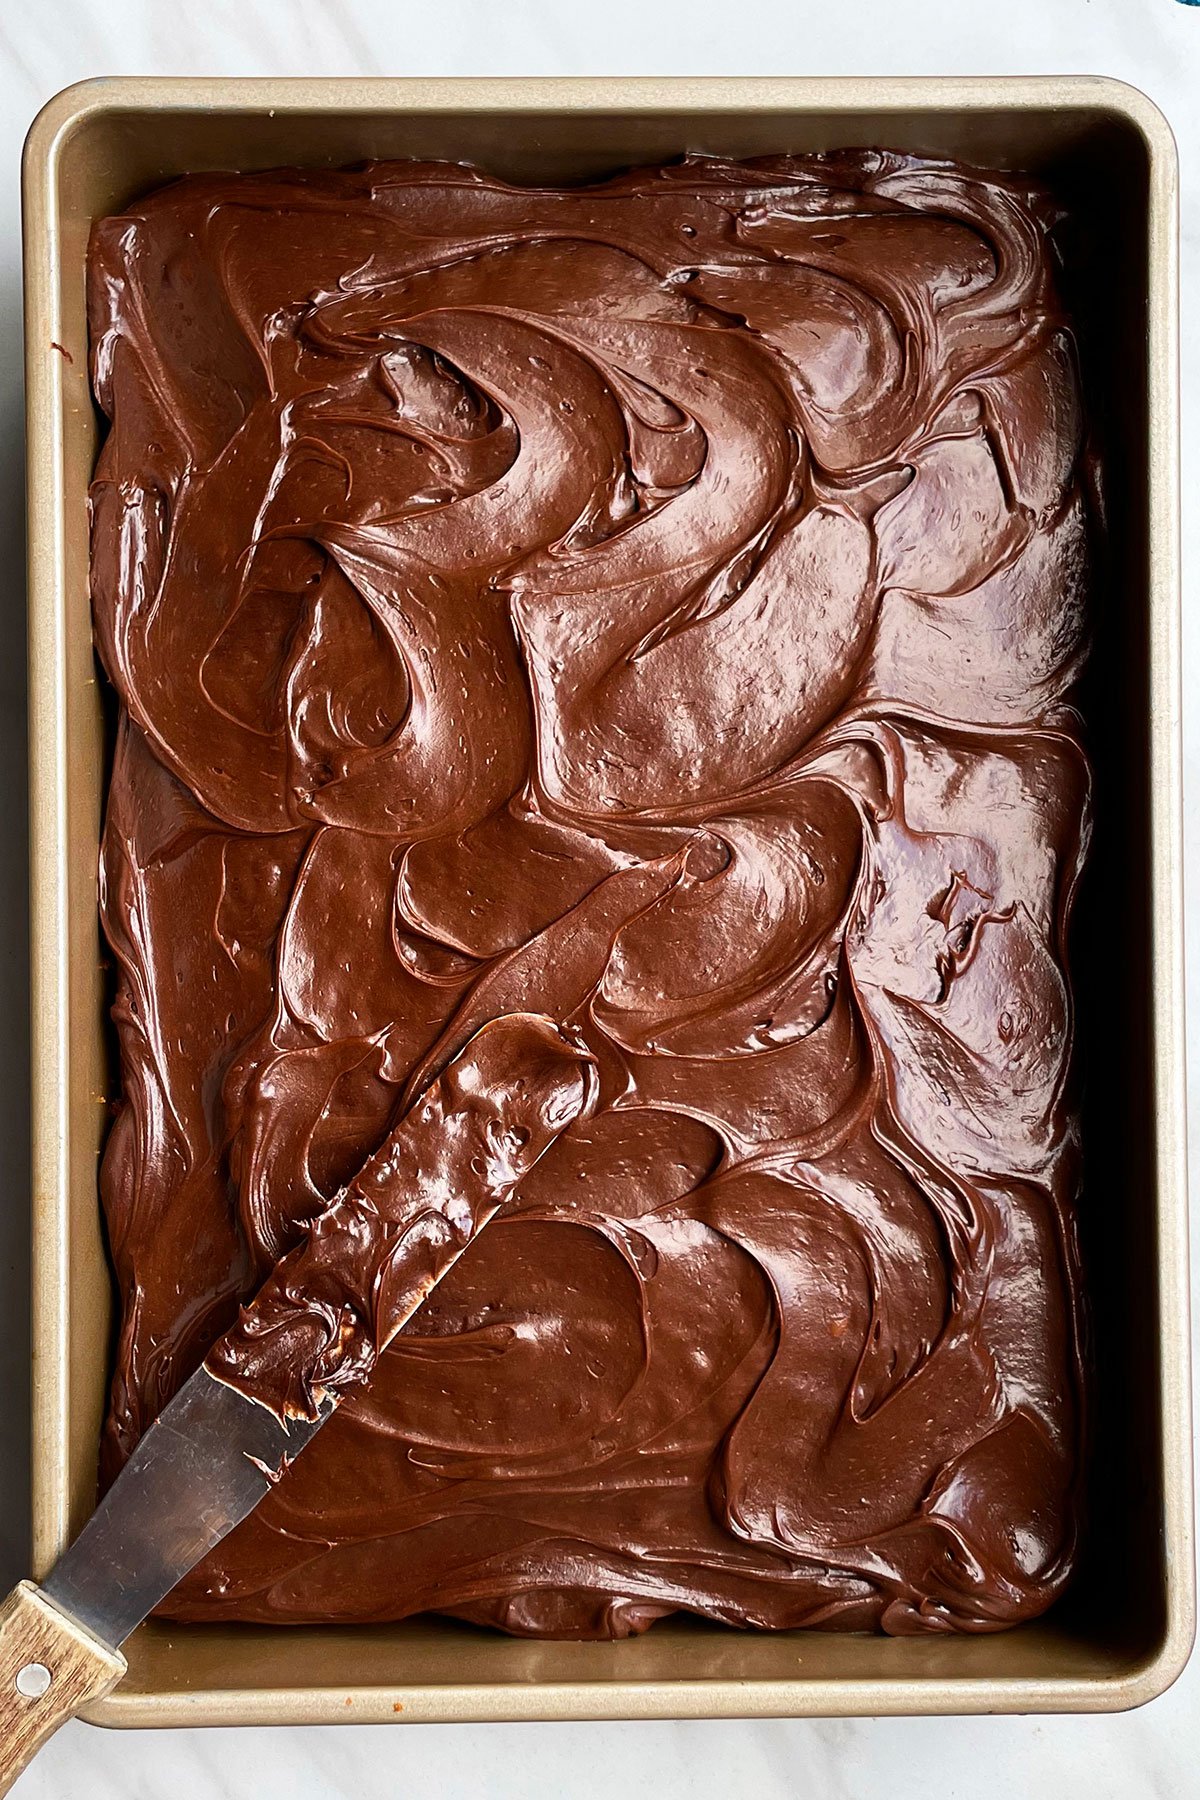 Chocolate Sour Cream Frosting Spread on Top of Rectangular Cake With Spatula on the Side. 